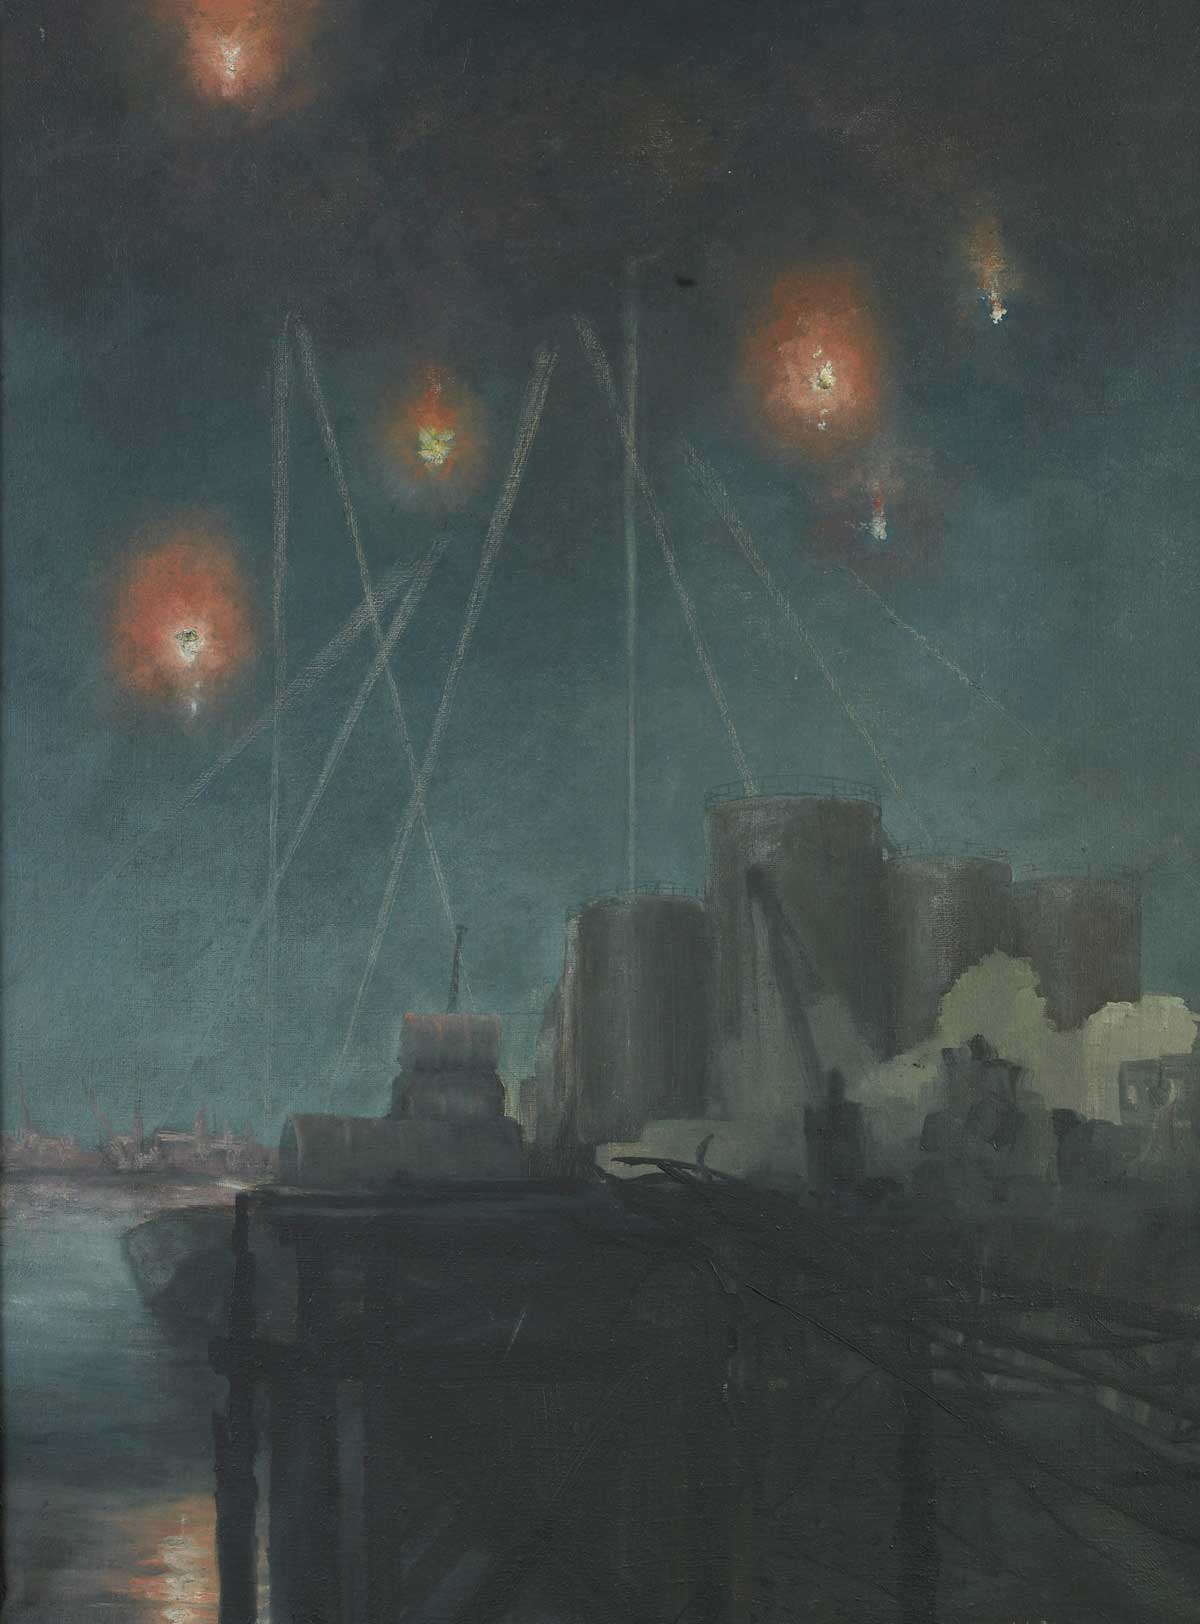 This painting shows an air raid during the Second World War, with anti-aircraft shells exploding over the Docklands as oil tanks are illuminated in the night sky.